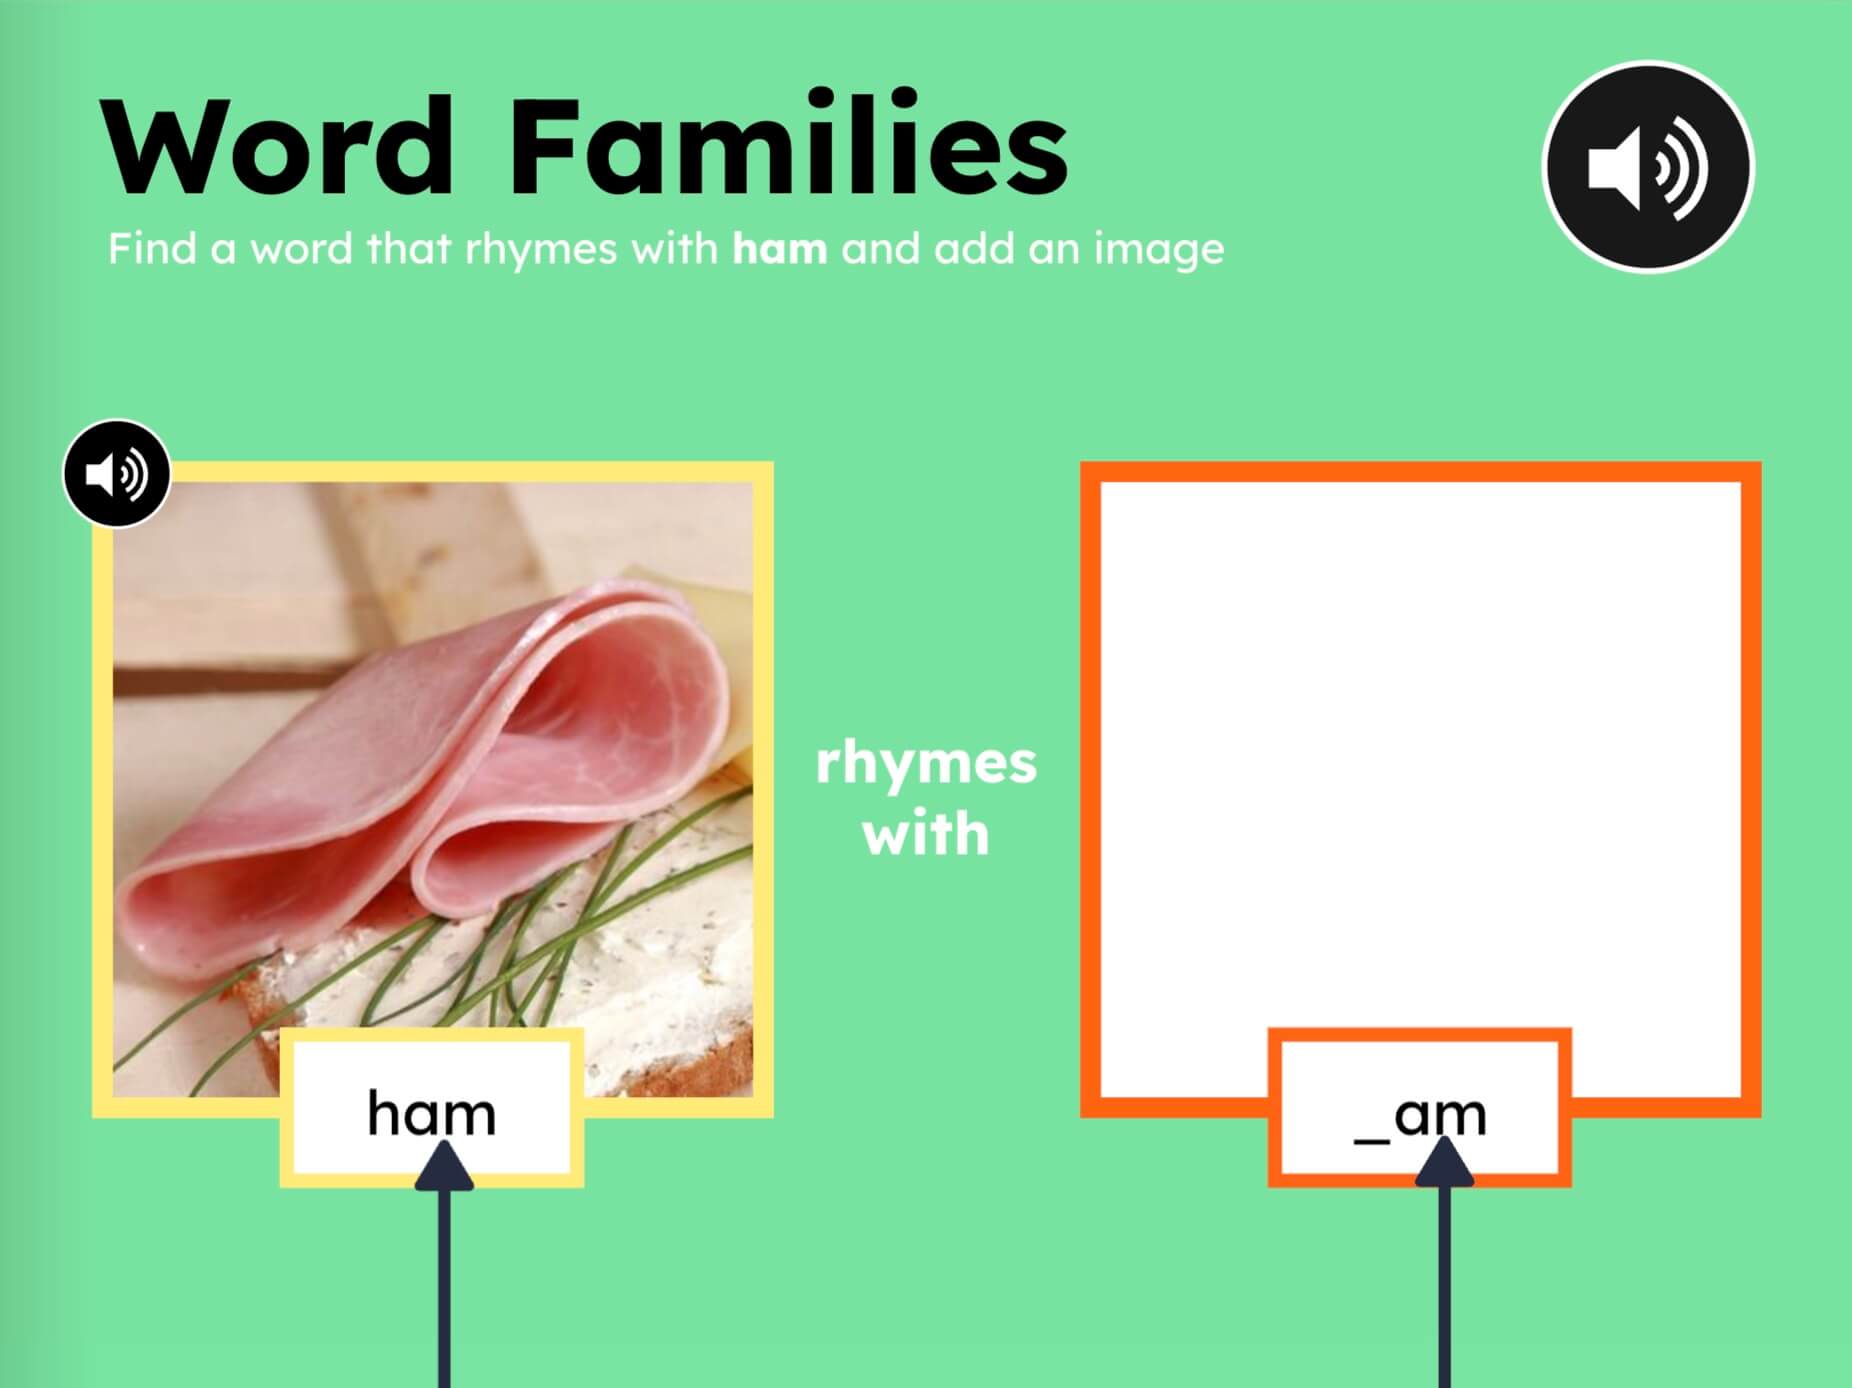 Word Families exercise